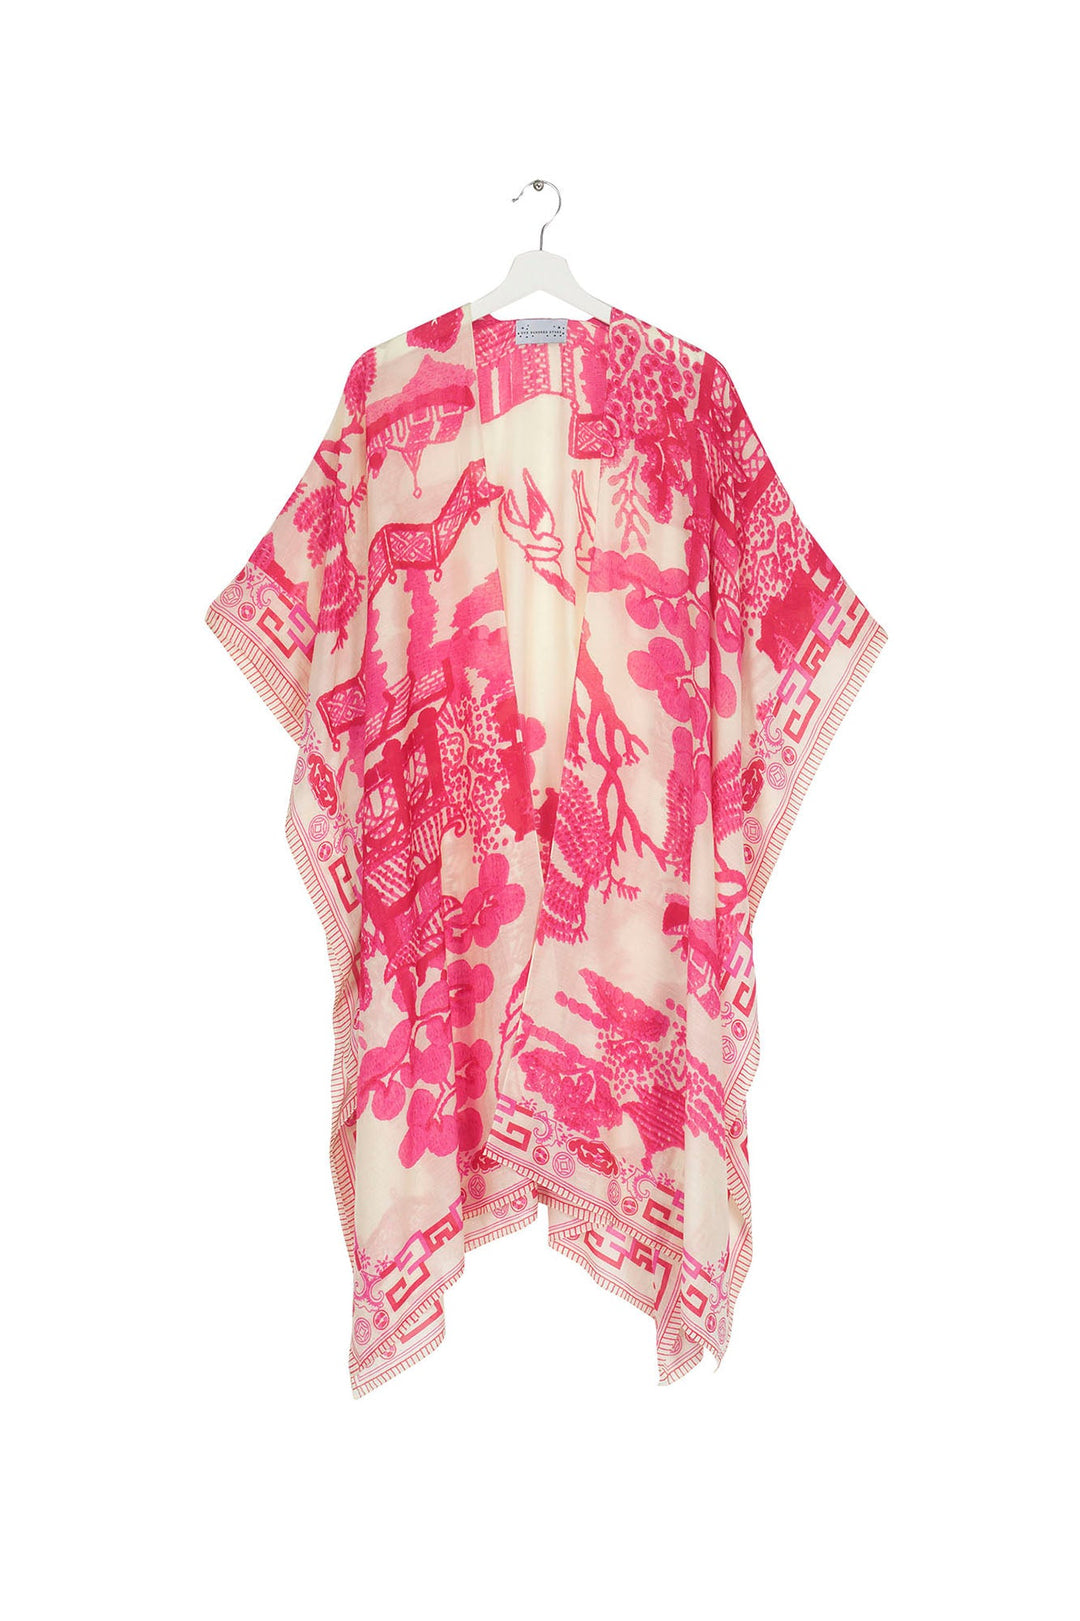 Women's lightweight throwover shawl in pink and white giant willow print by One Hundred Stars